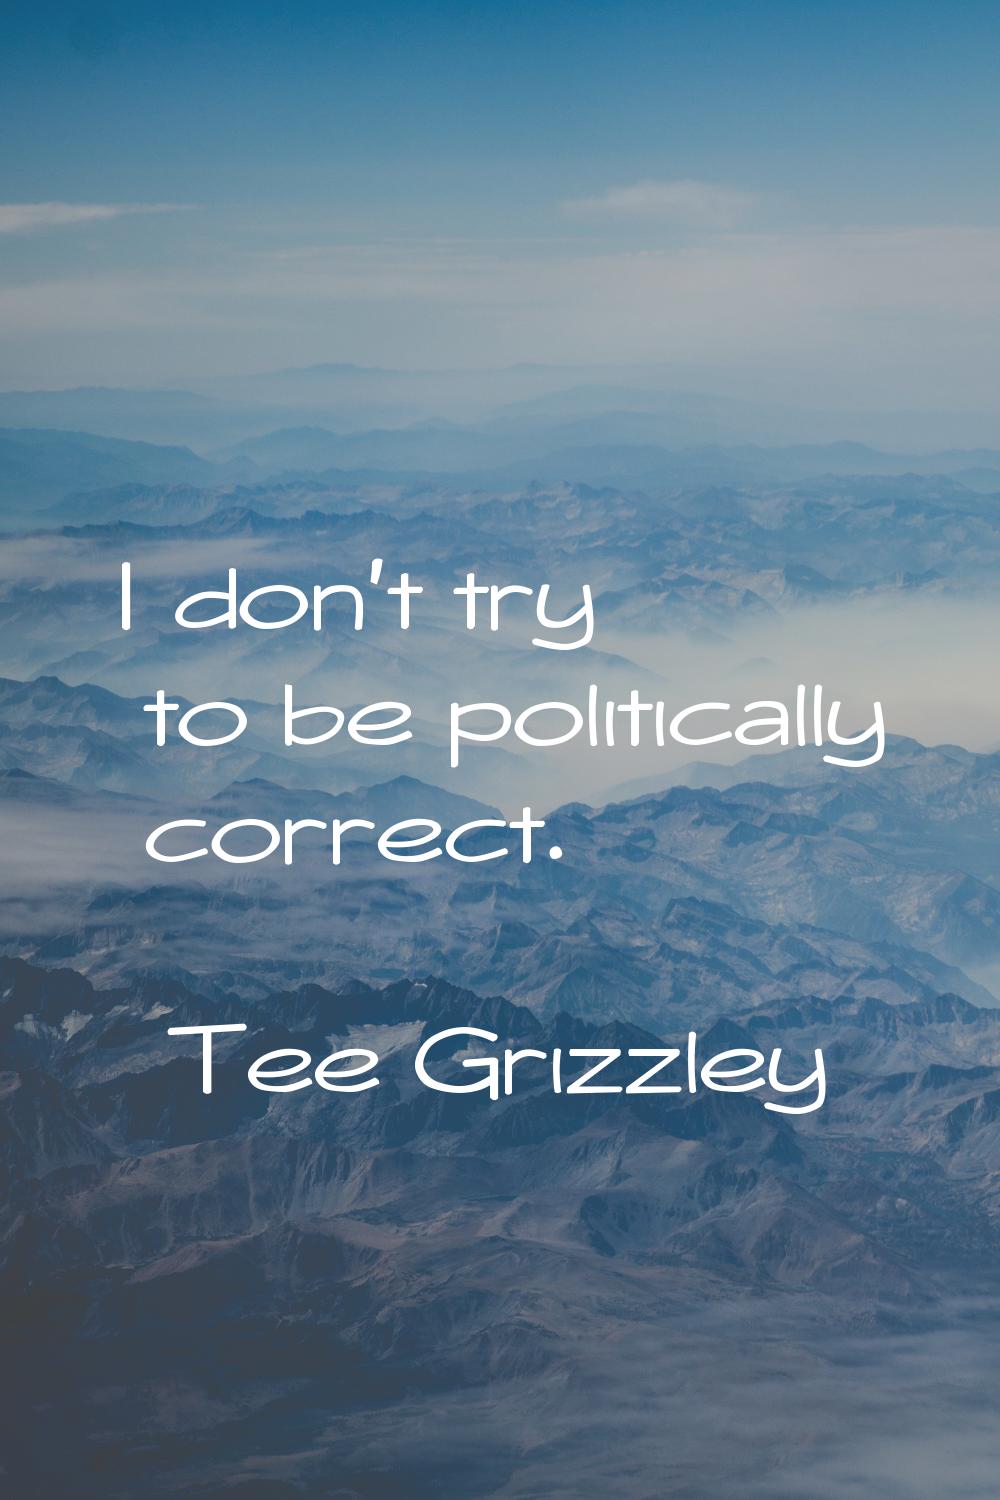 I don't try to be politically correct.